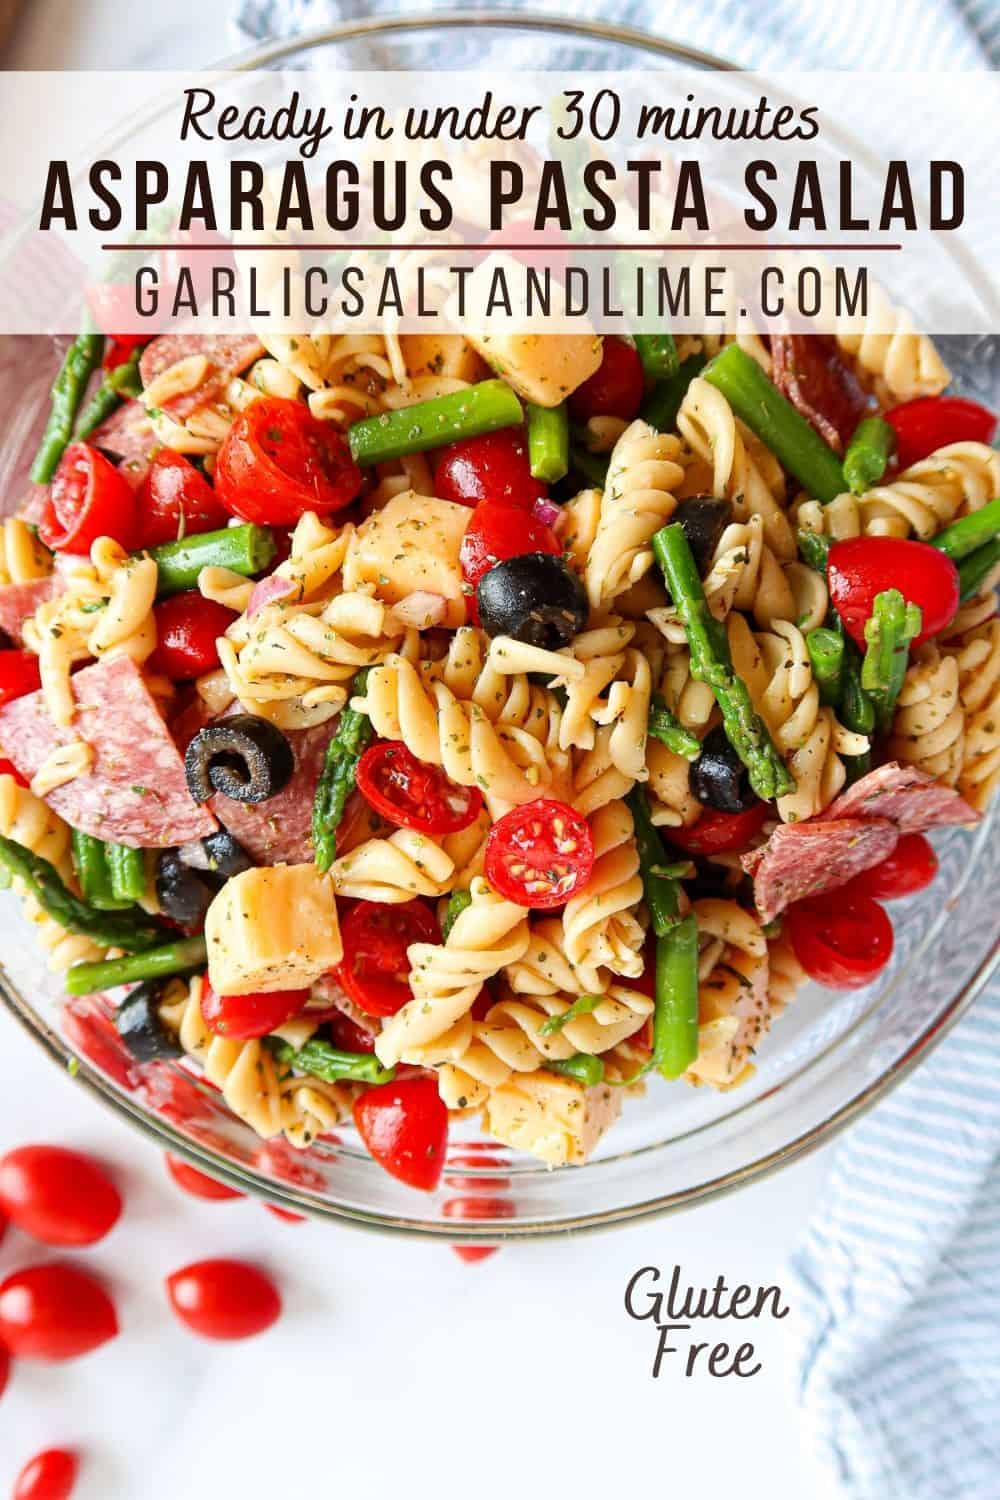 Pasta salad in a glass bowl with text overlay for Pinterest.